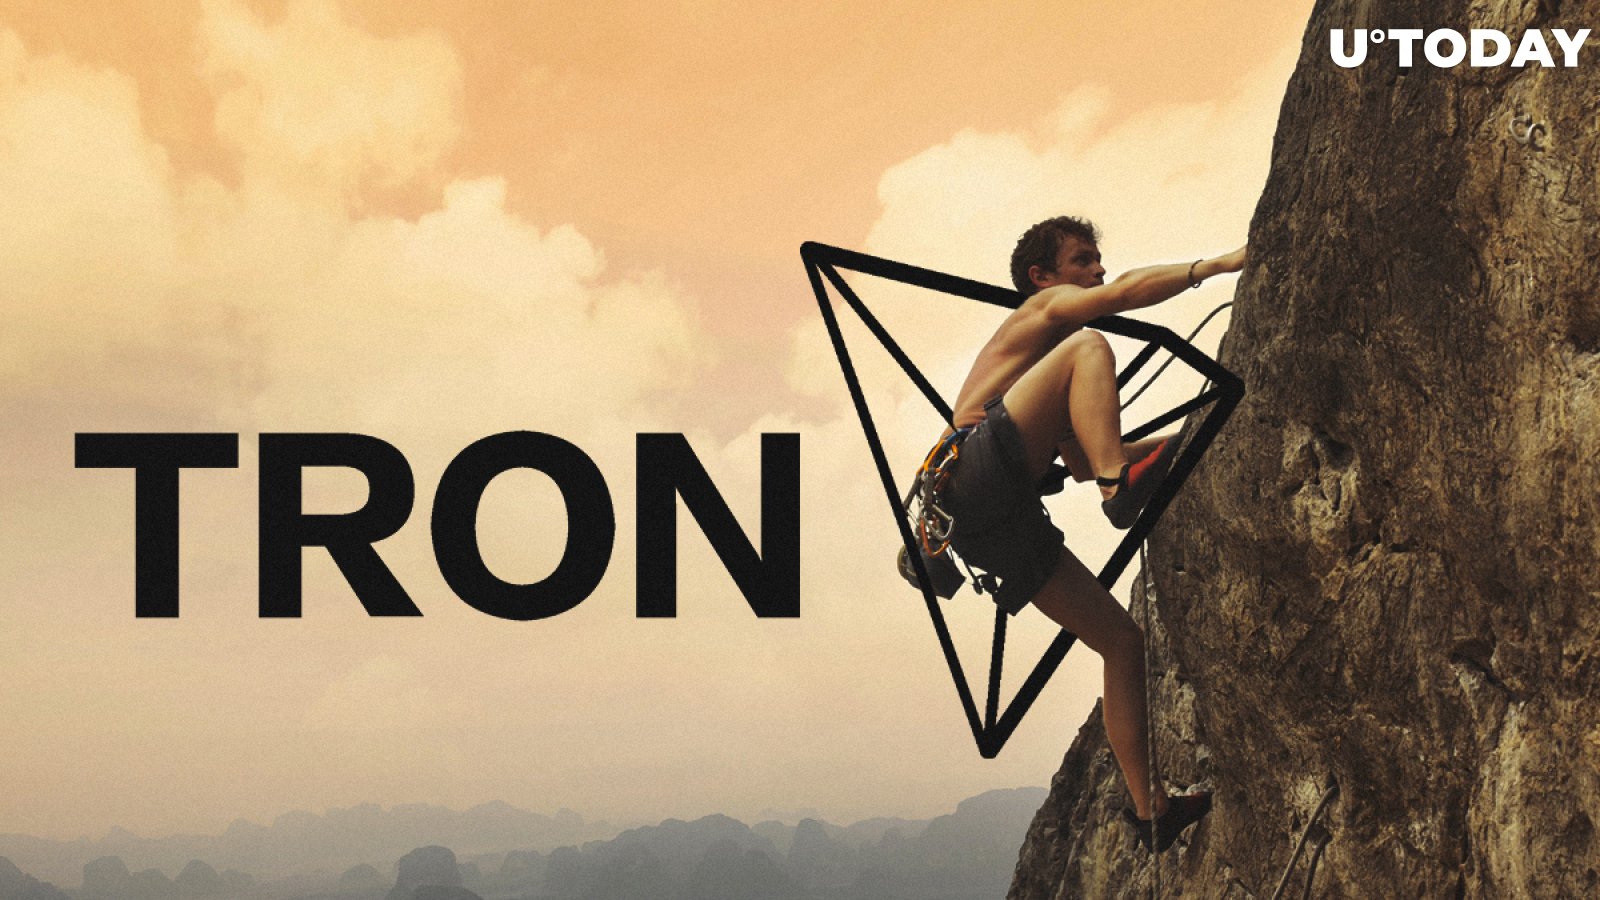 Tron (TRX) Price Forecast: Expect $0.08 TRX Price by the End of 2019, If Tron Manages to Overcome Resistance